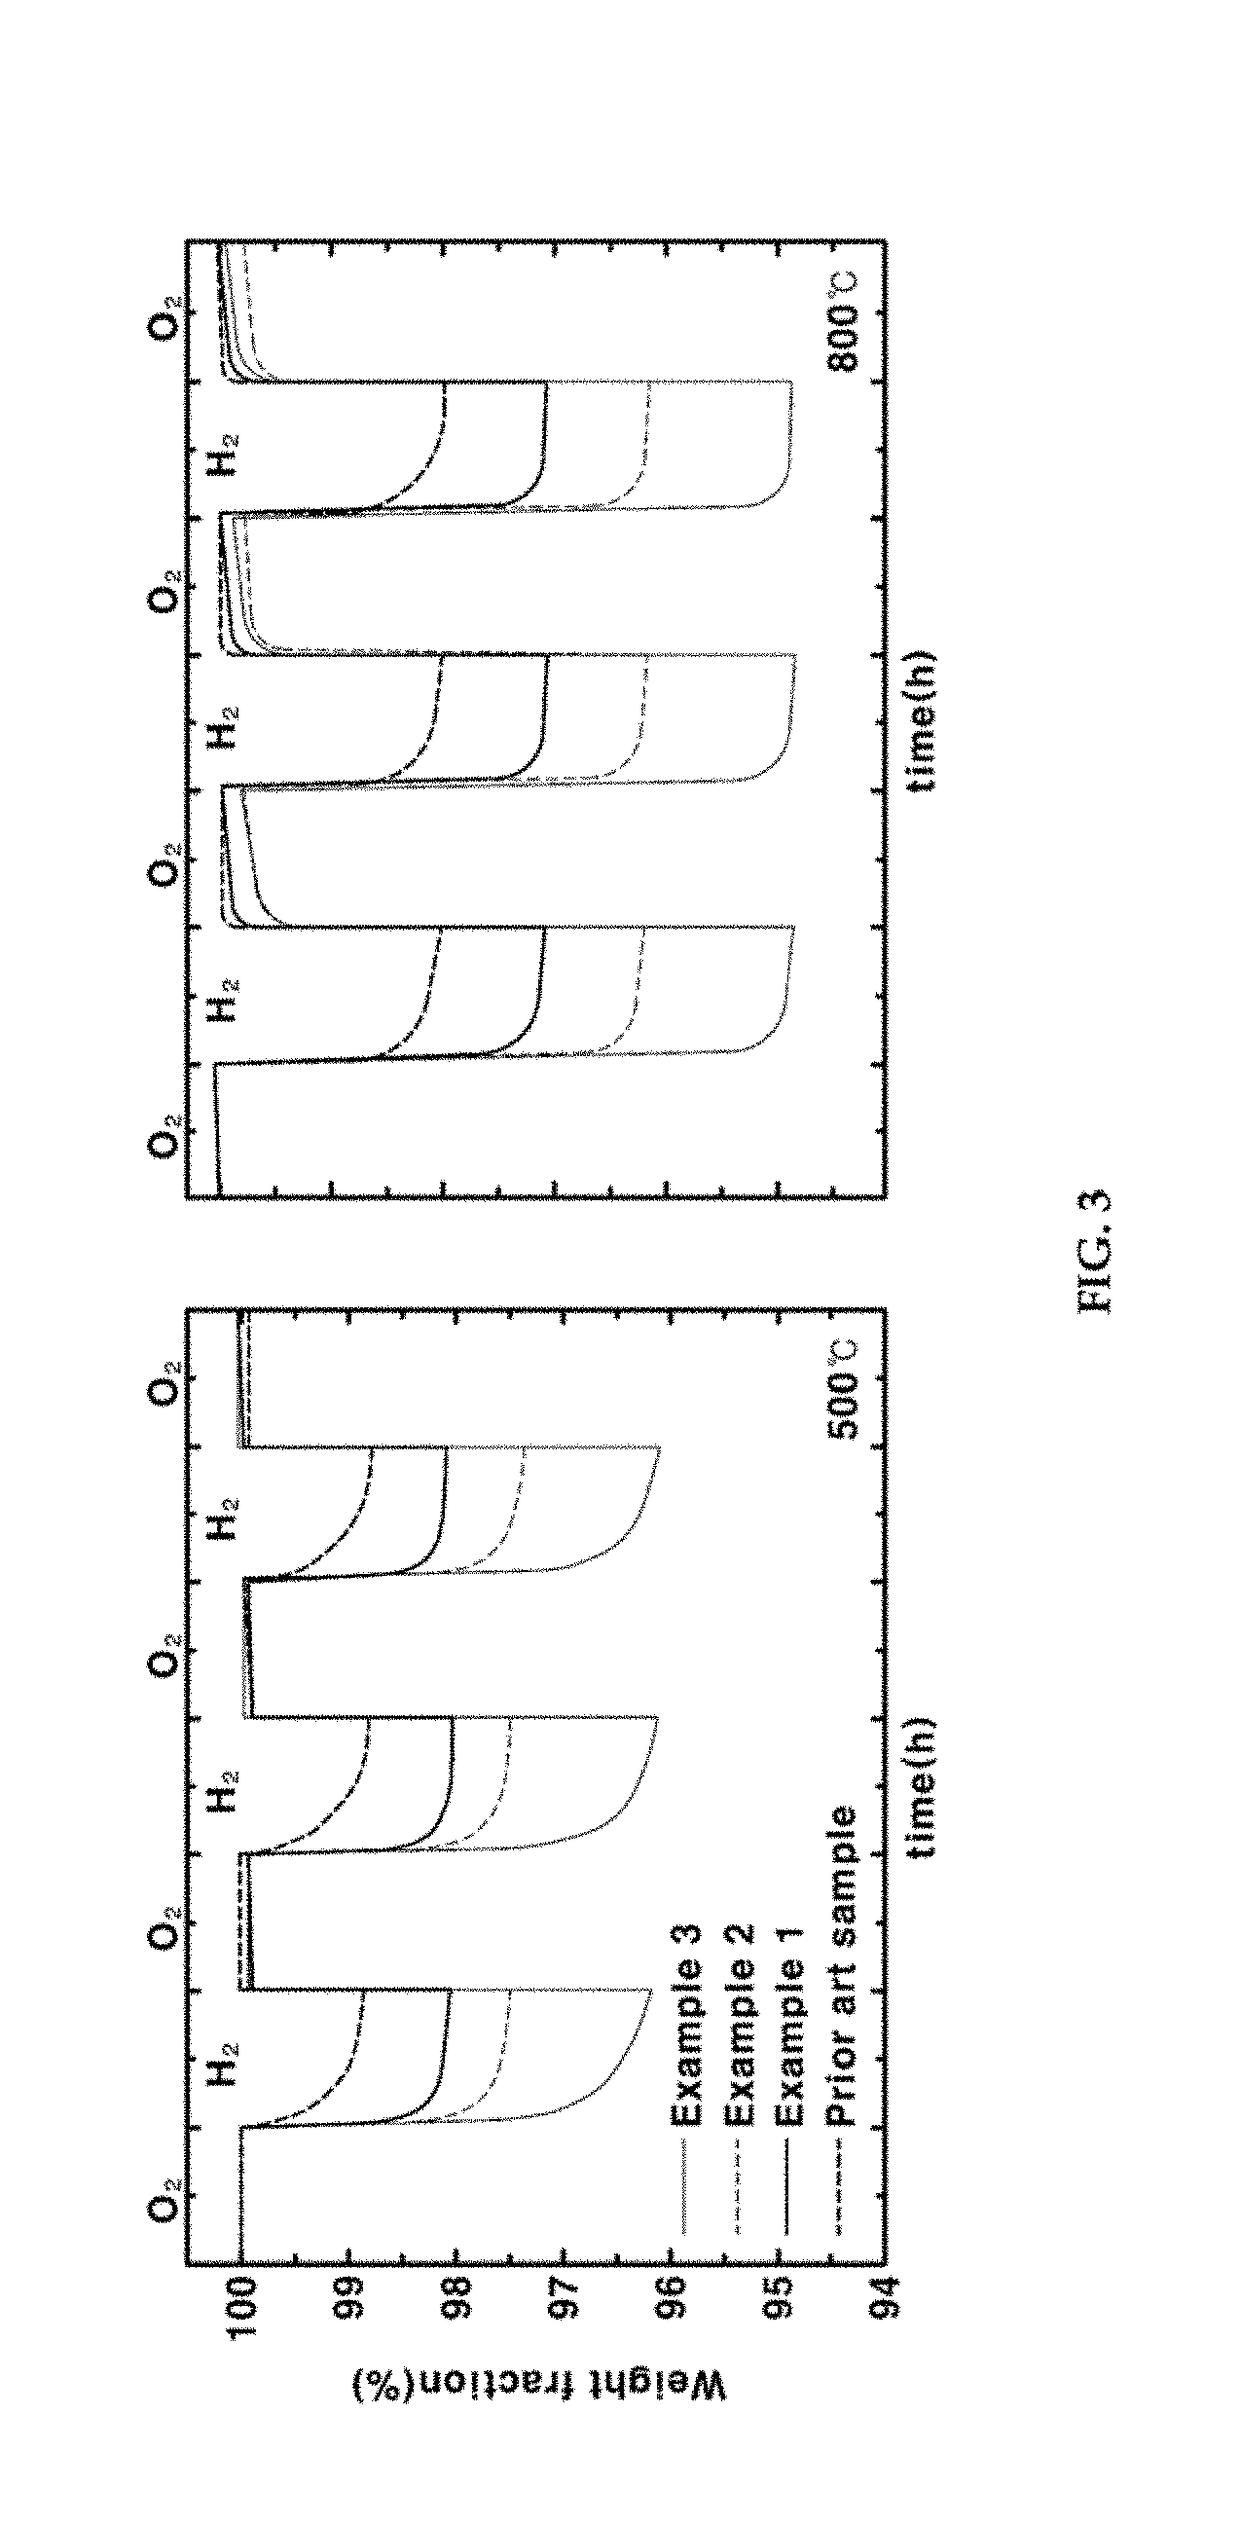 Multi-scaled oxygen storage material based on ceria-zirconia having high oxygen storage and releasing ability and a preparation method thereof